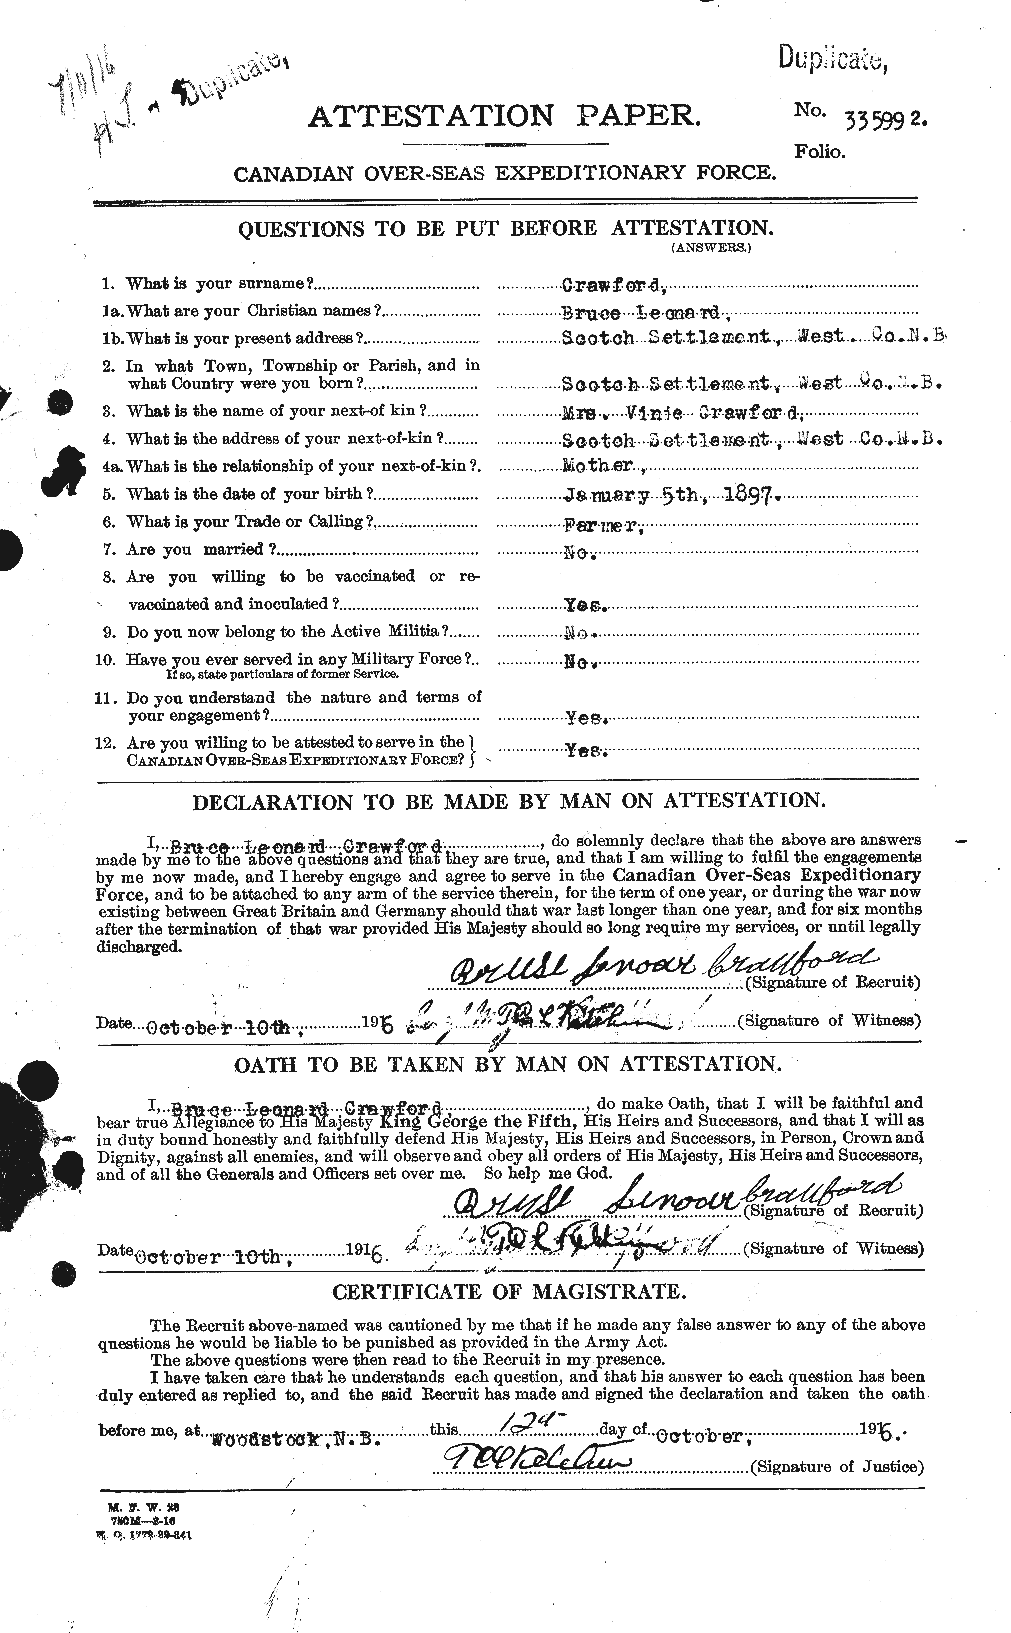 Personnel Records of the First World War - CEF 060916a